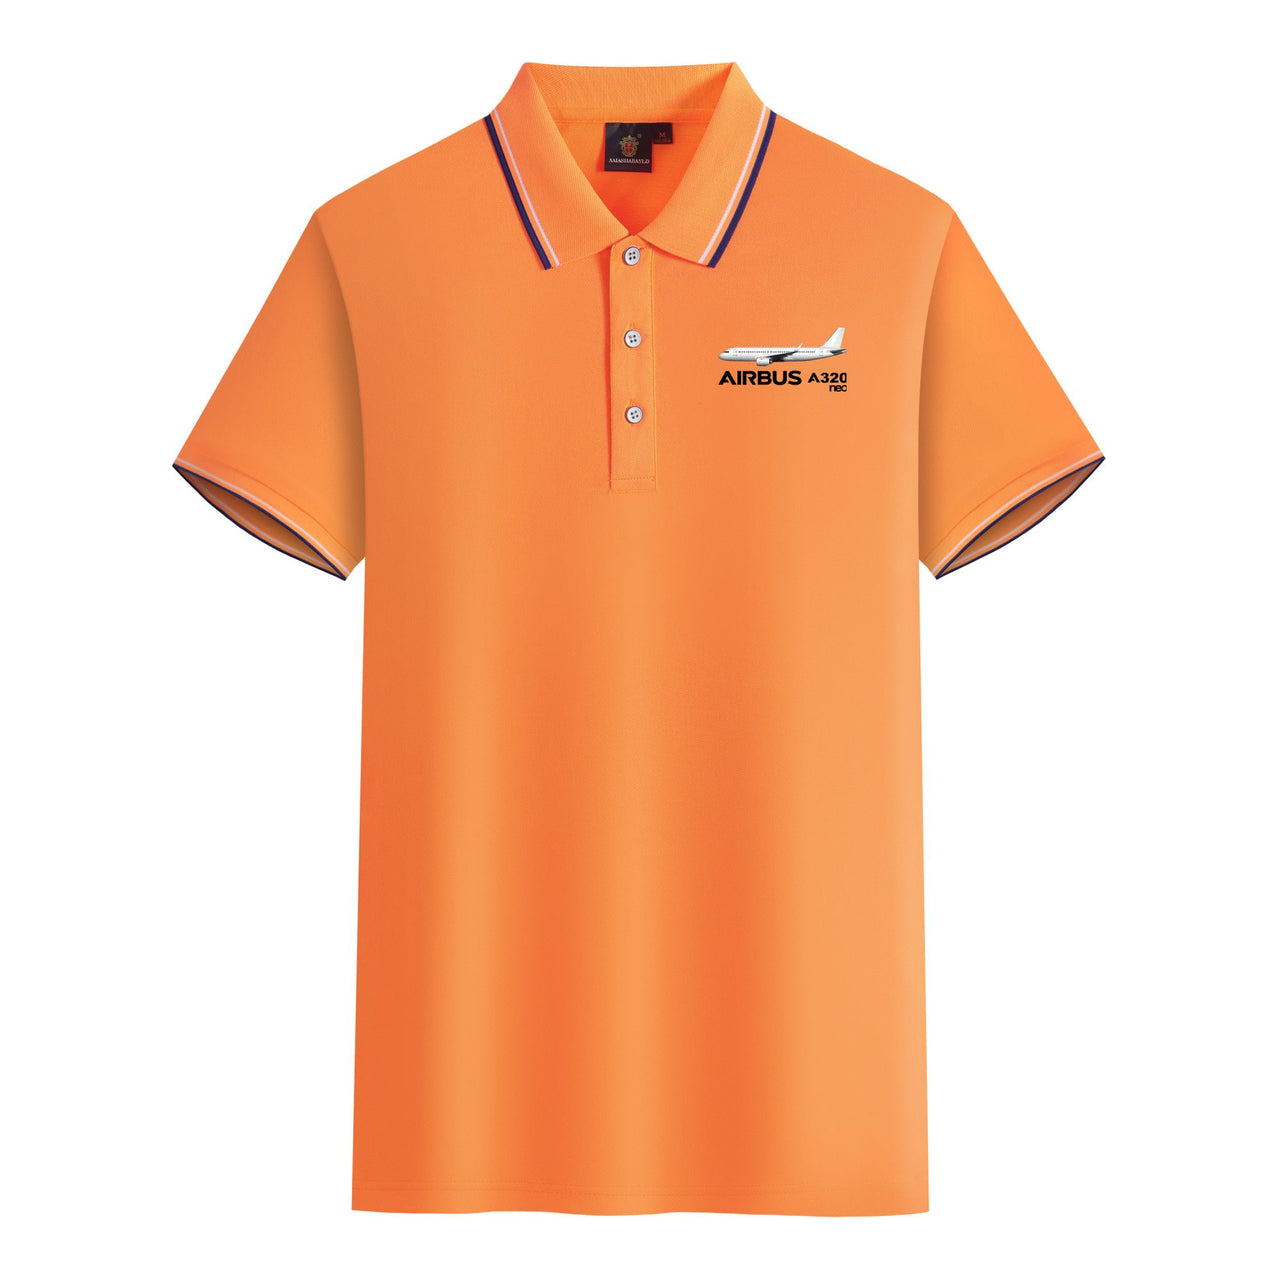 The Airbus A320Neo Designed Stylish Polo T-Shirts